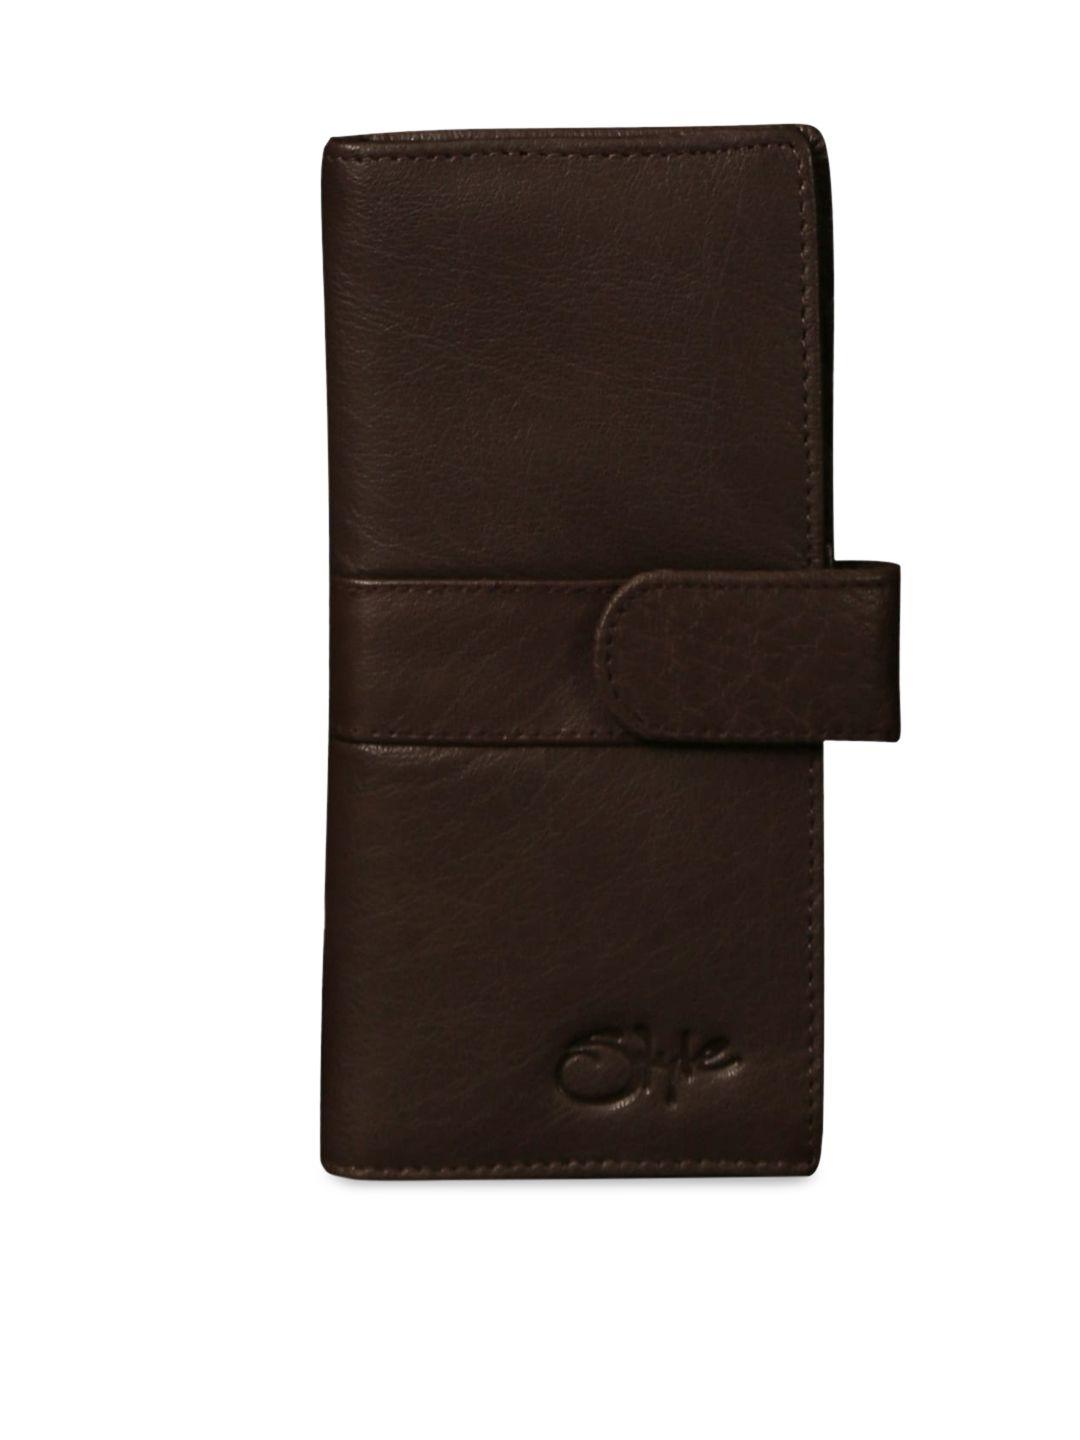 style shoes unisex brown solid card holder